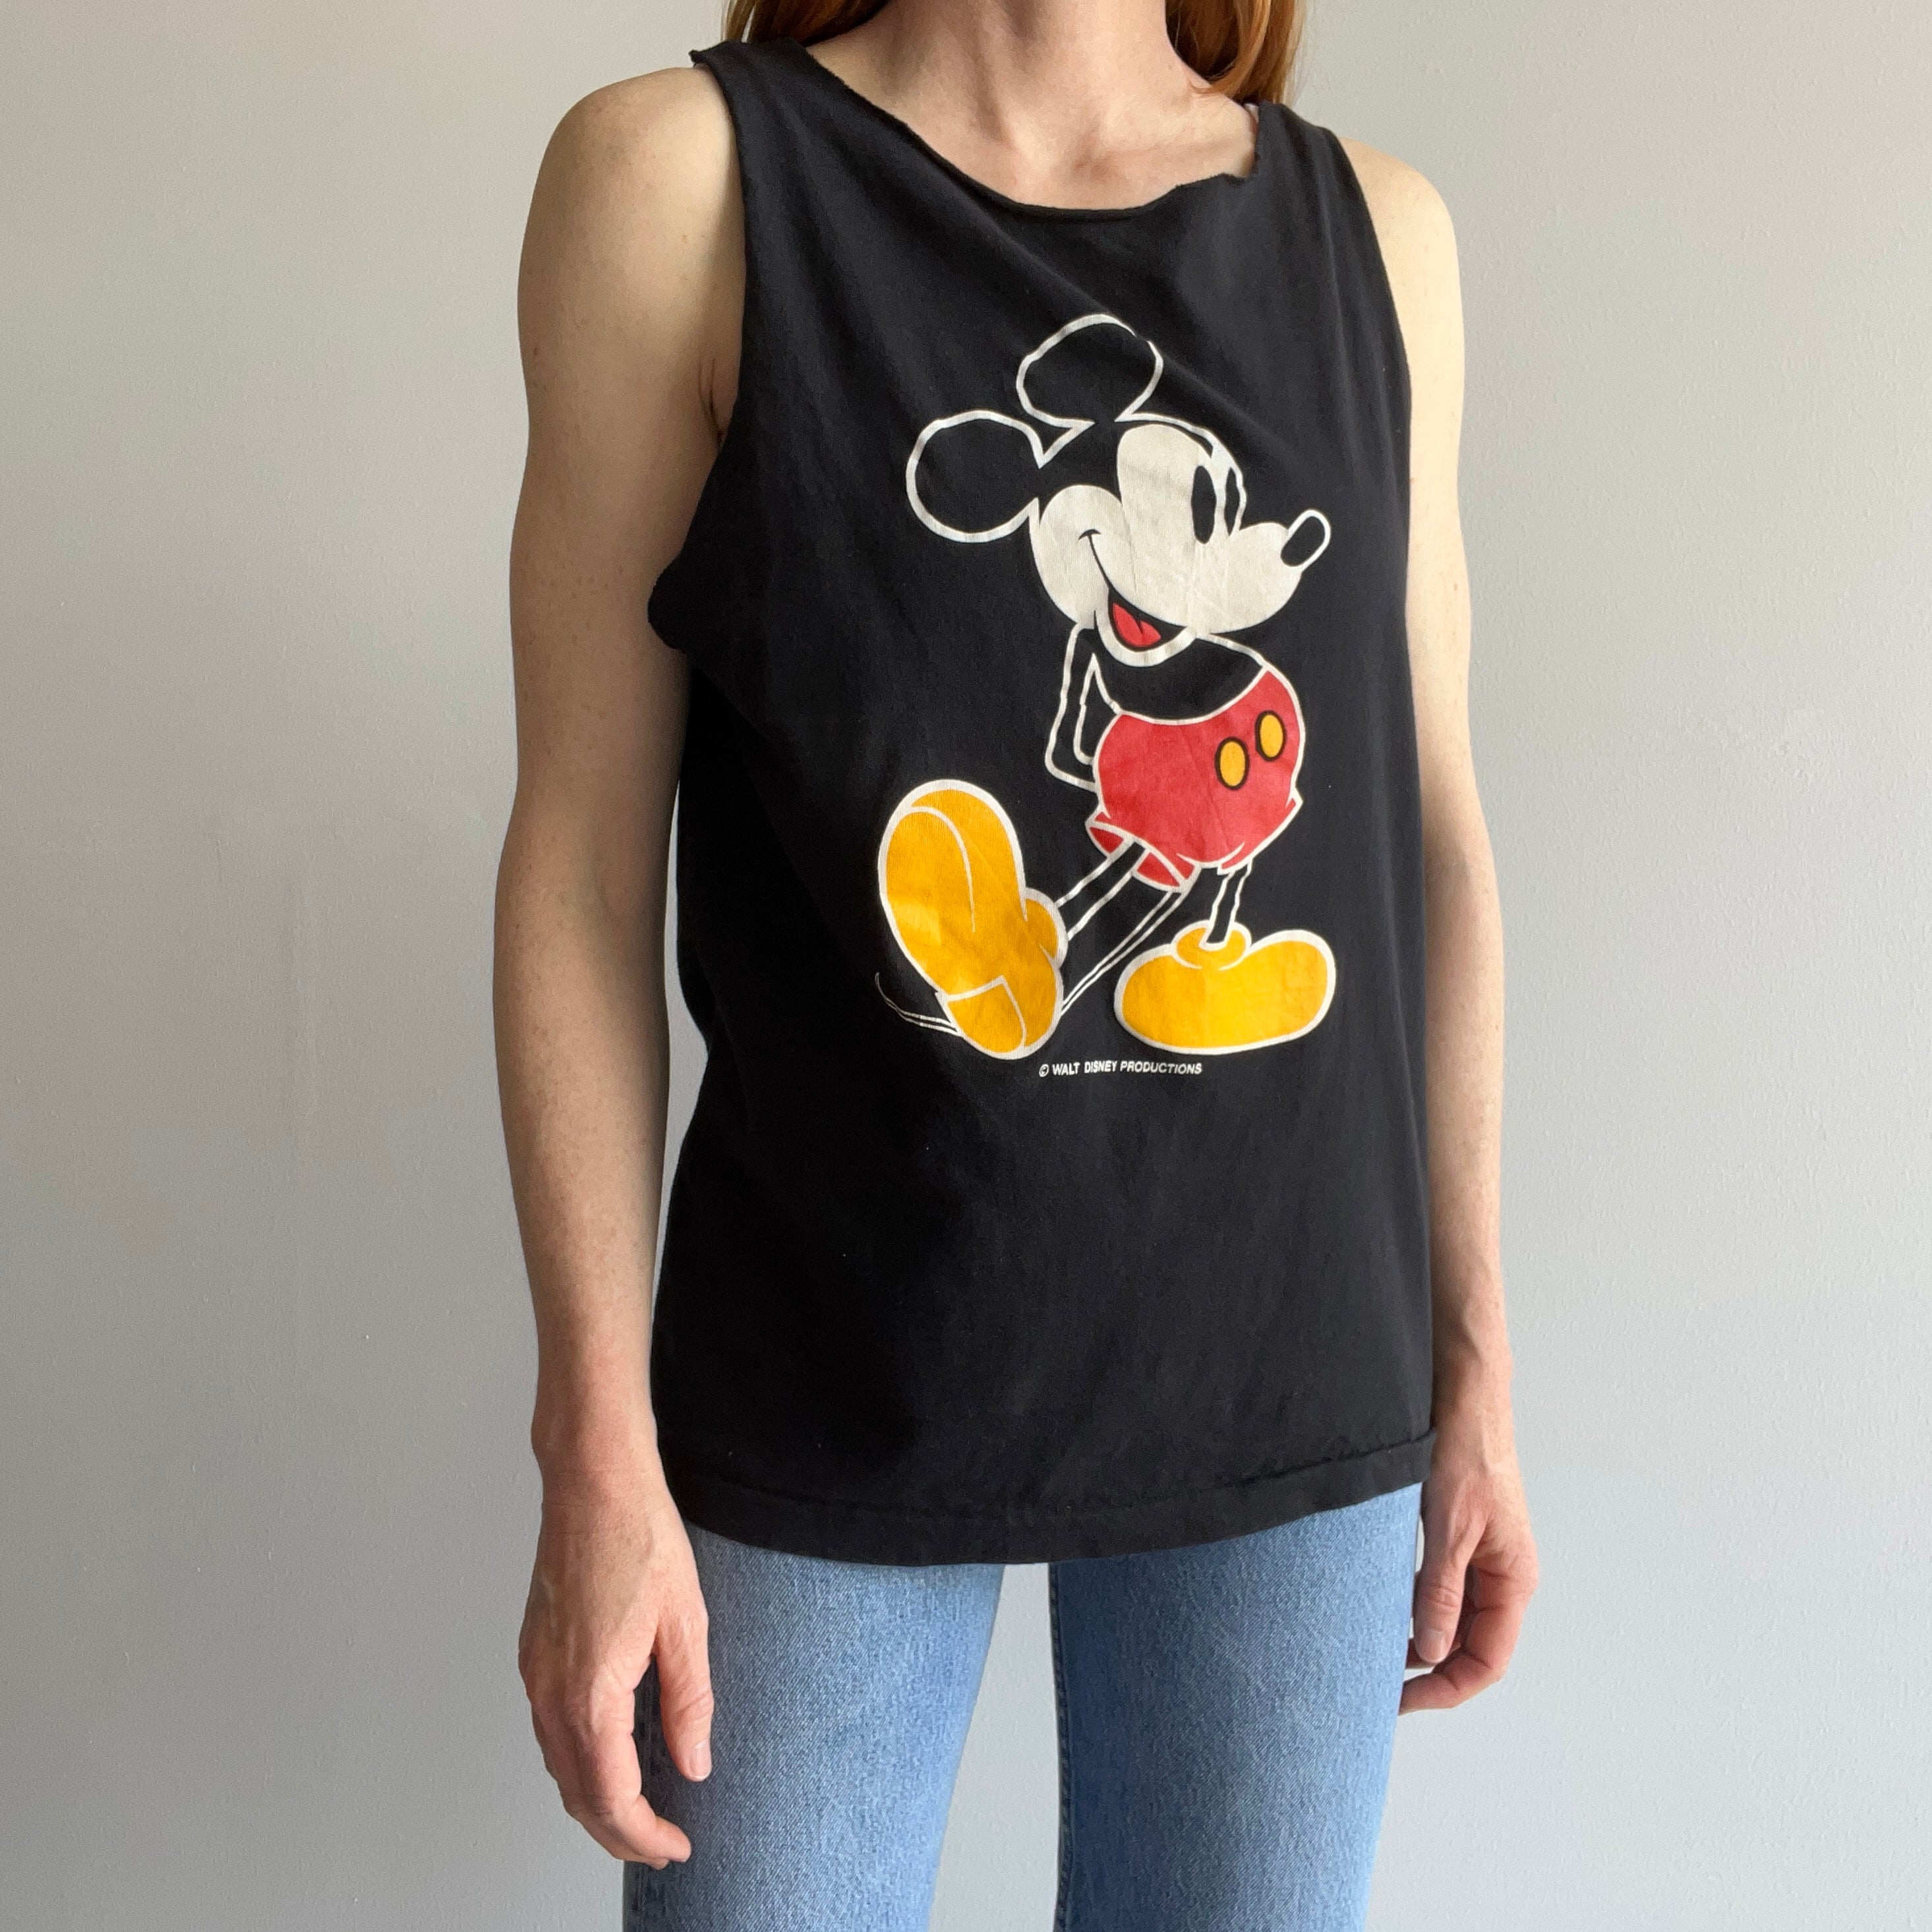 1980s Cut Neck and Sleeve Mickey Tank Top